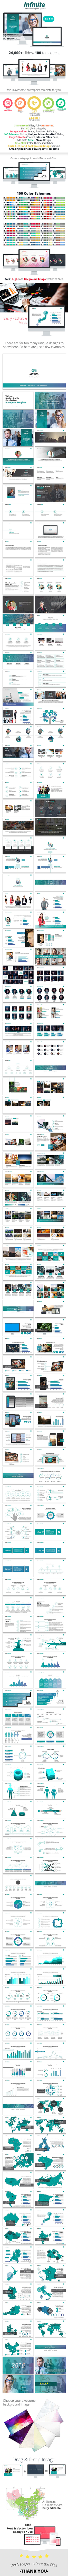 Infinite Powerpoint Template System